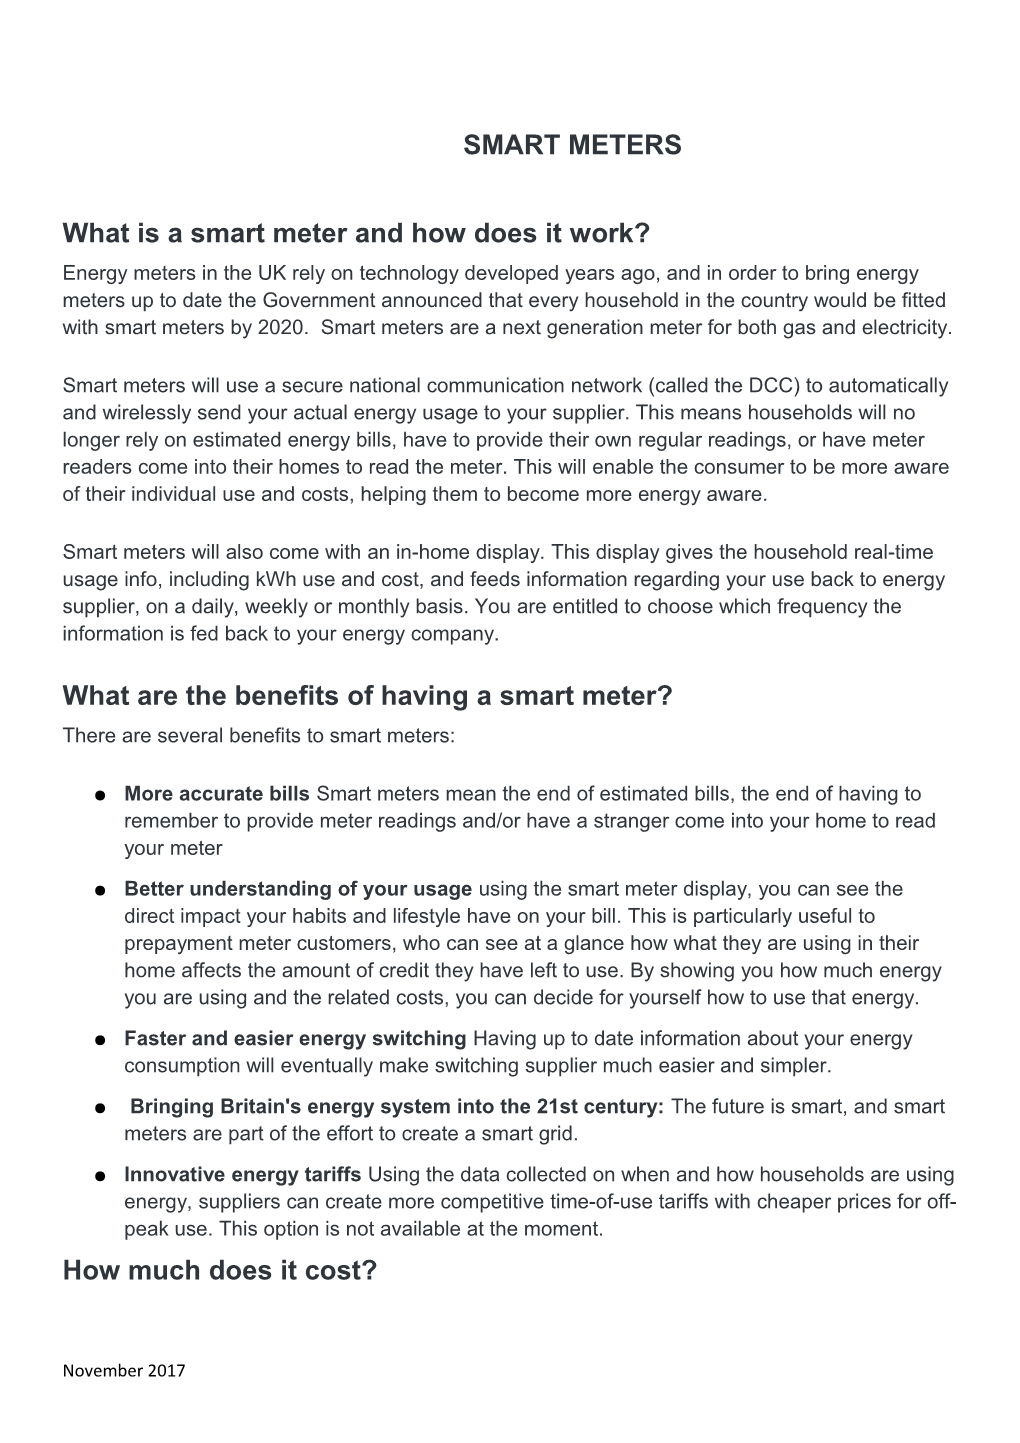 What Is a Smart Meter and How Does It Work?